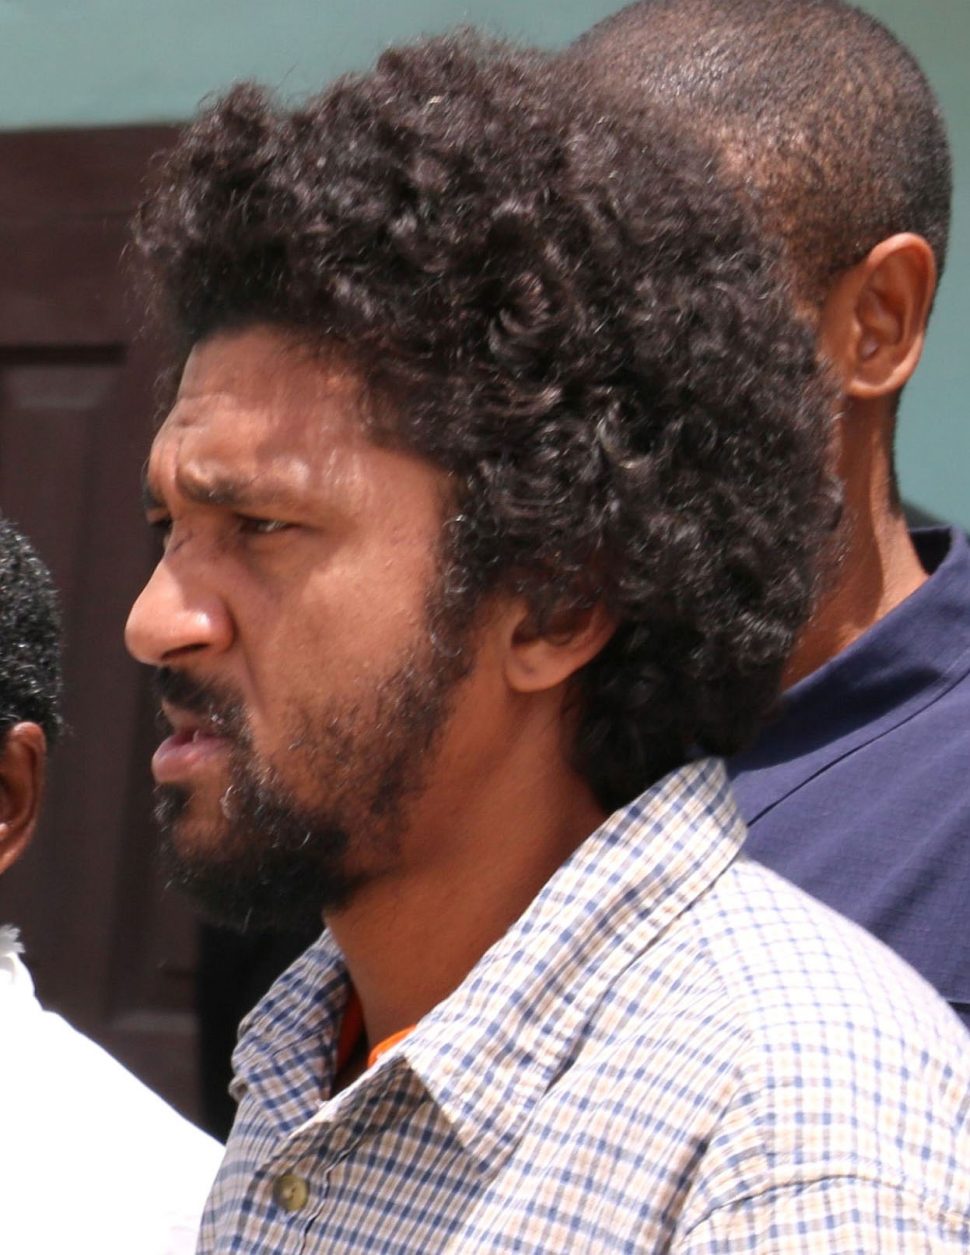 Brian Mc Kenzie being escorted to the Sangre Grande Magistrates Court on Wednesday.